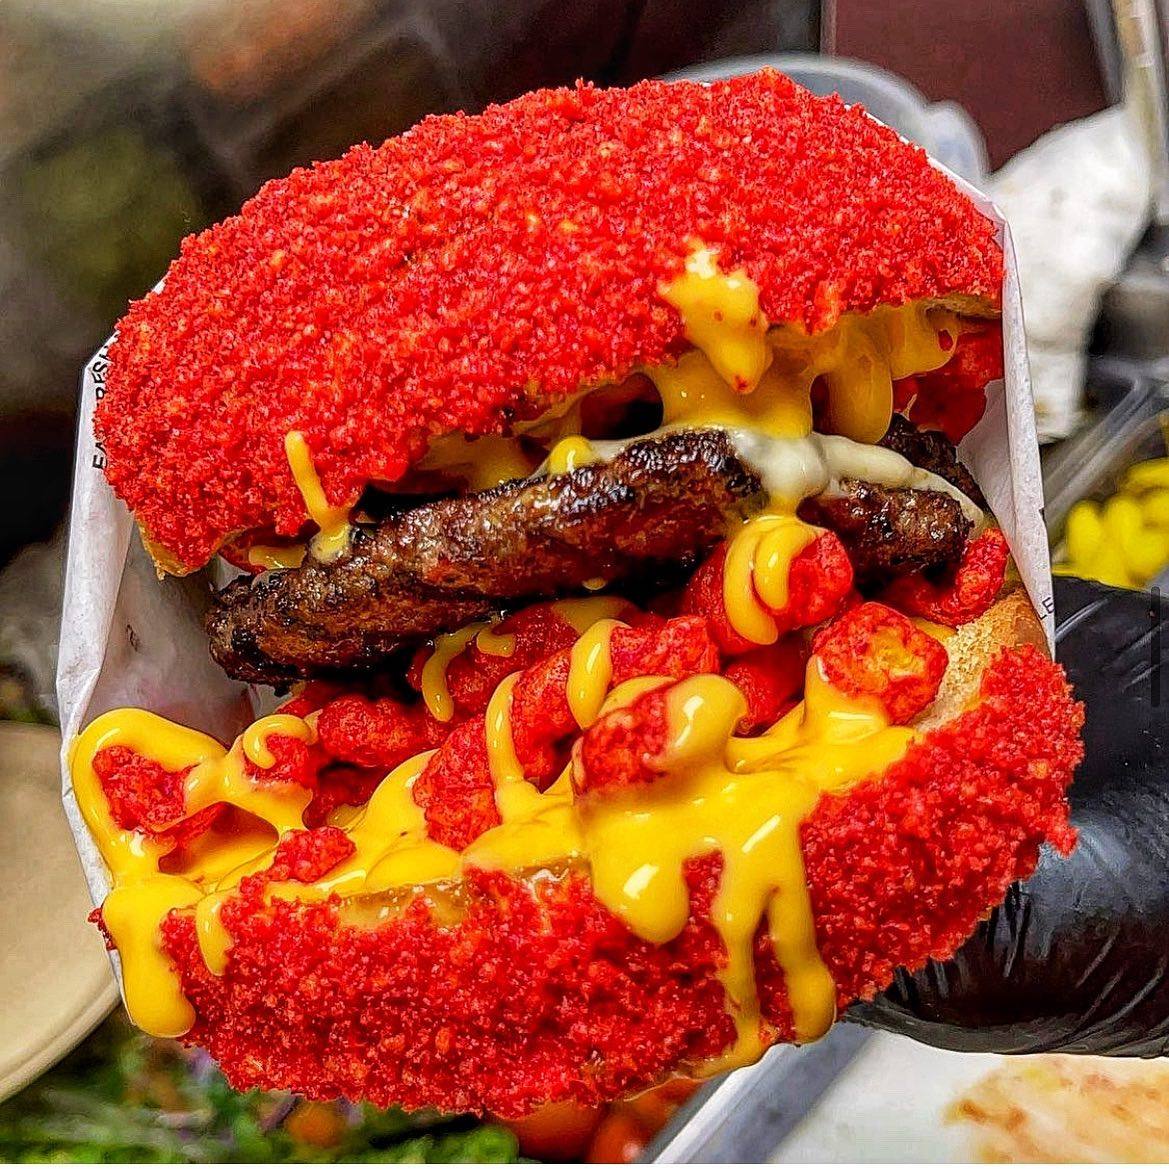 When one of Fatima’s Grill’s Flamin’ Hot Cheeto burgers went viral on TikTok thanks to influencer @misohungry, the small restaurant in California saw a huge surge in business - a frequent occurrence when restaurants’ food and drinks get attention from social media stars. Photo: Fatima’s Grill